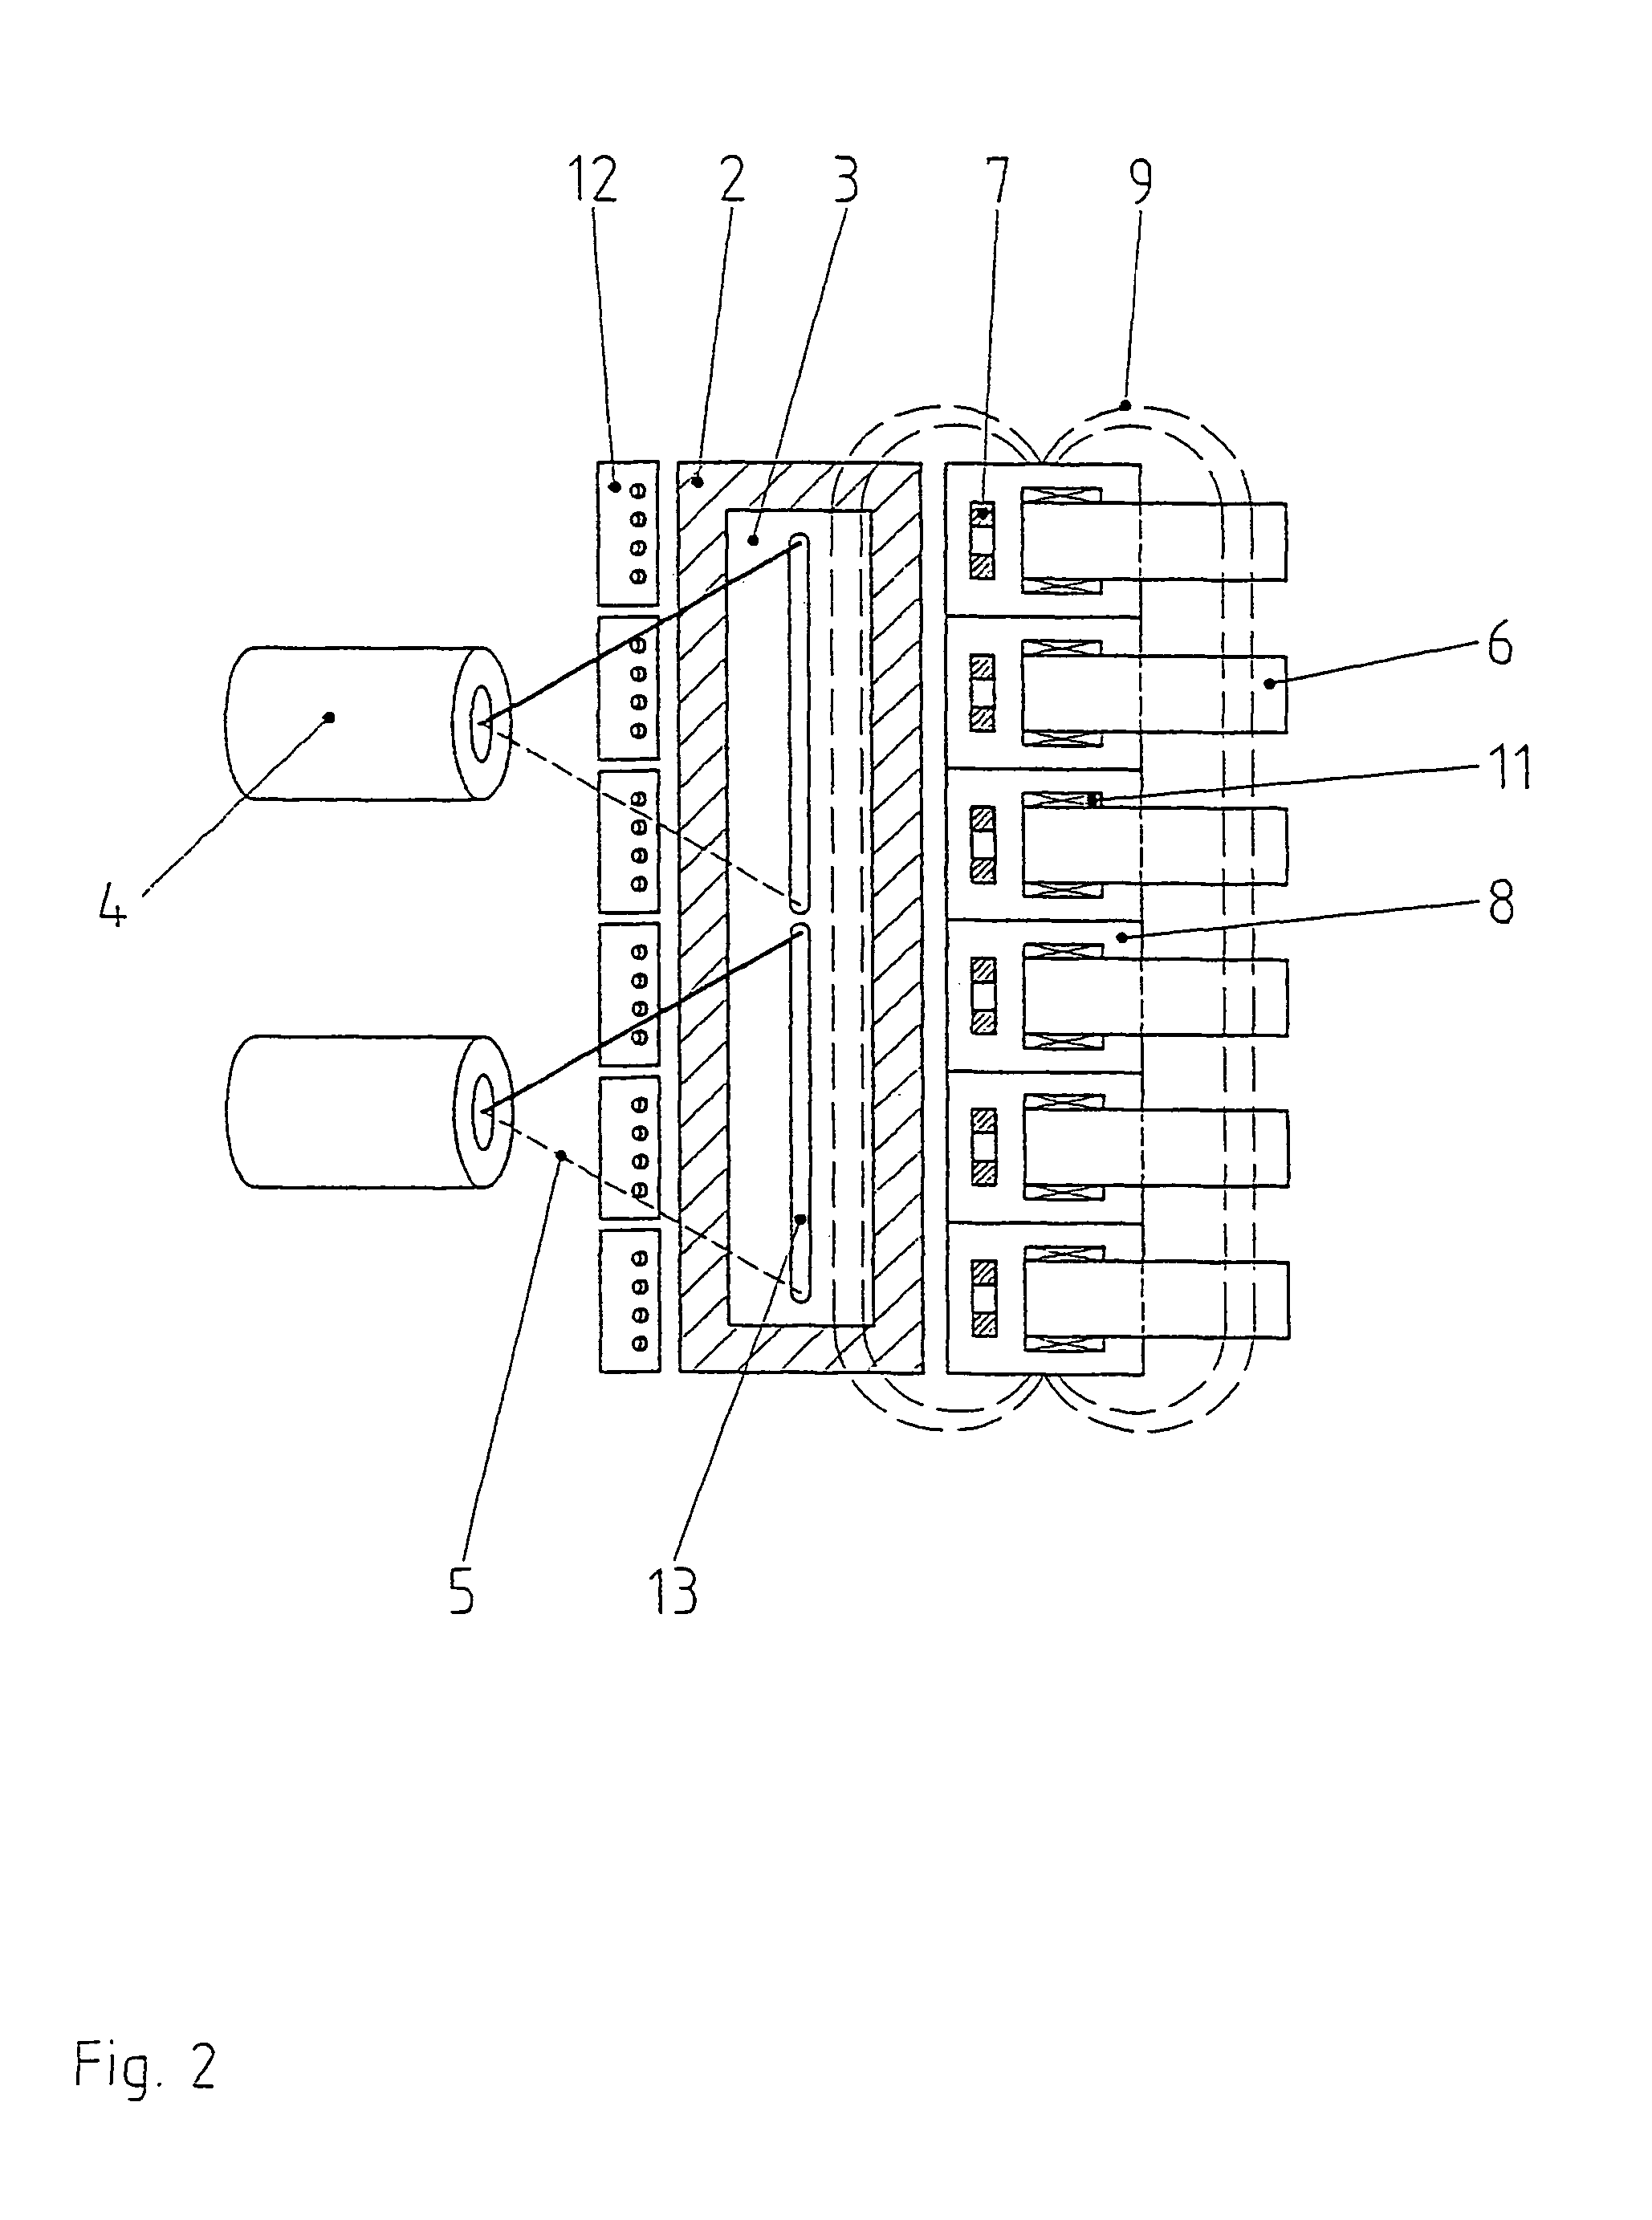 Device for plasma-activated vapor coating of large surfaces